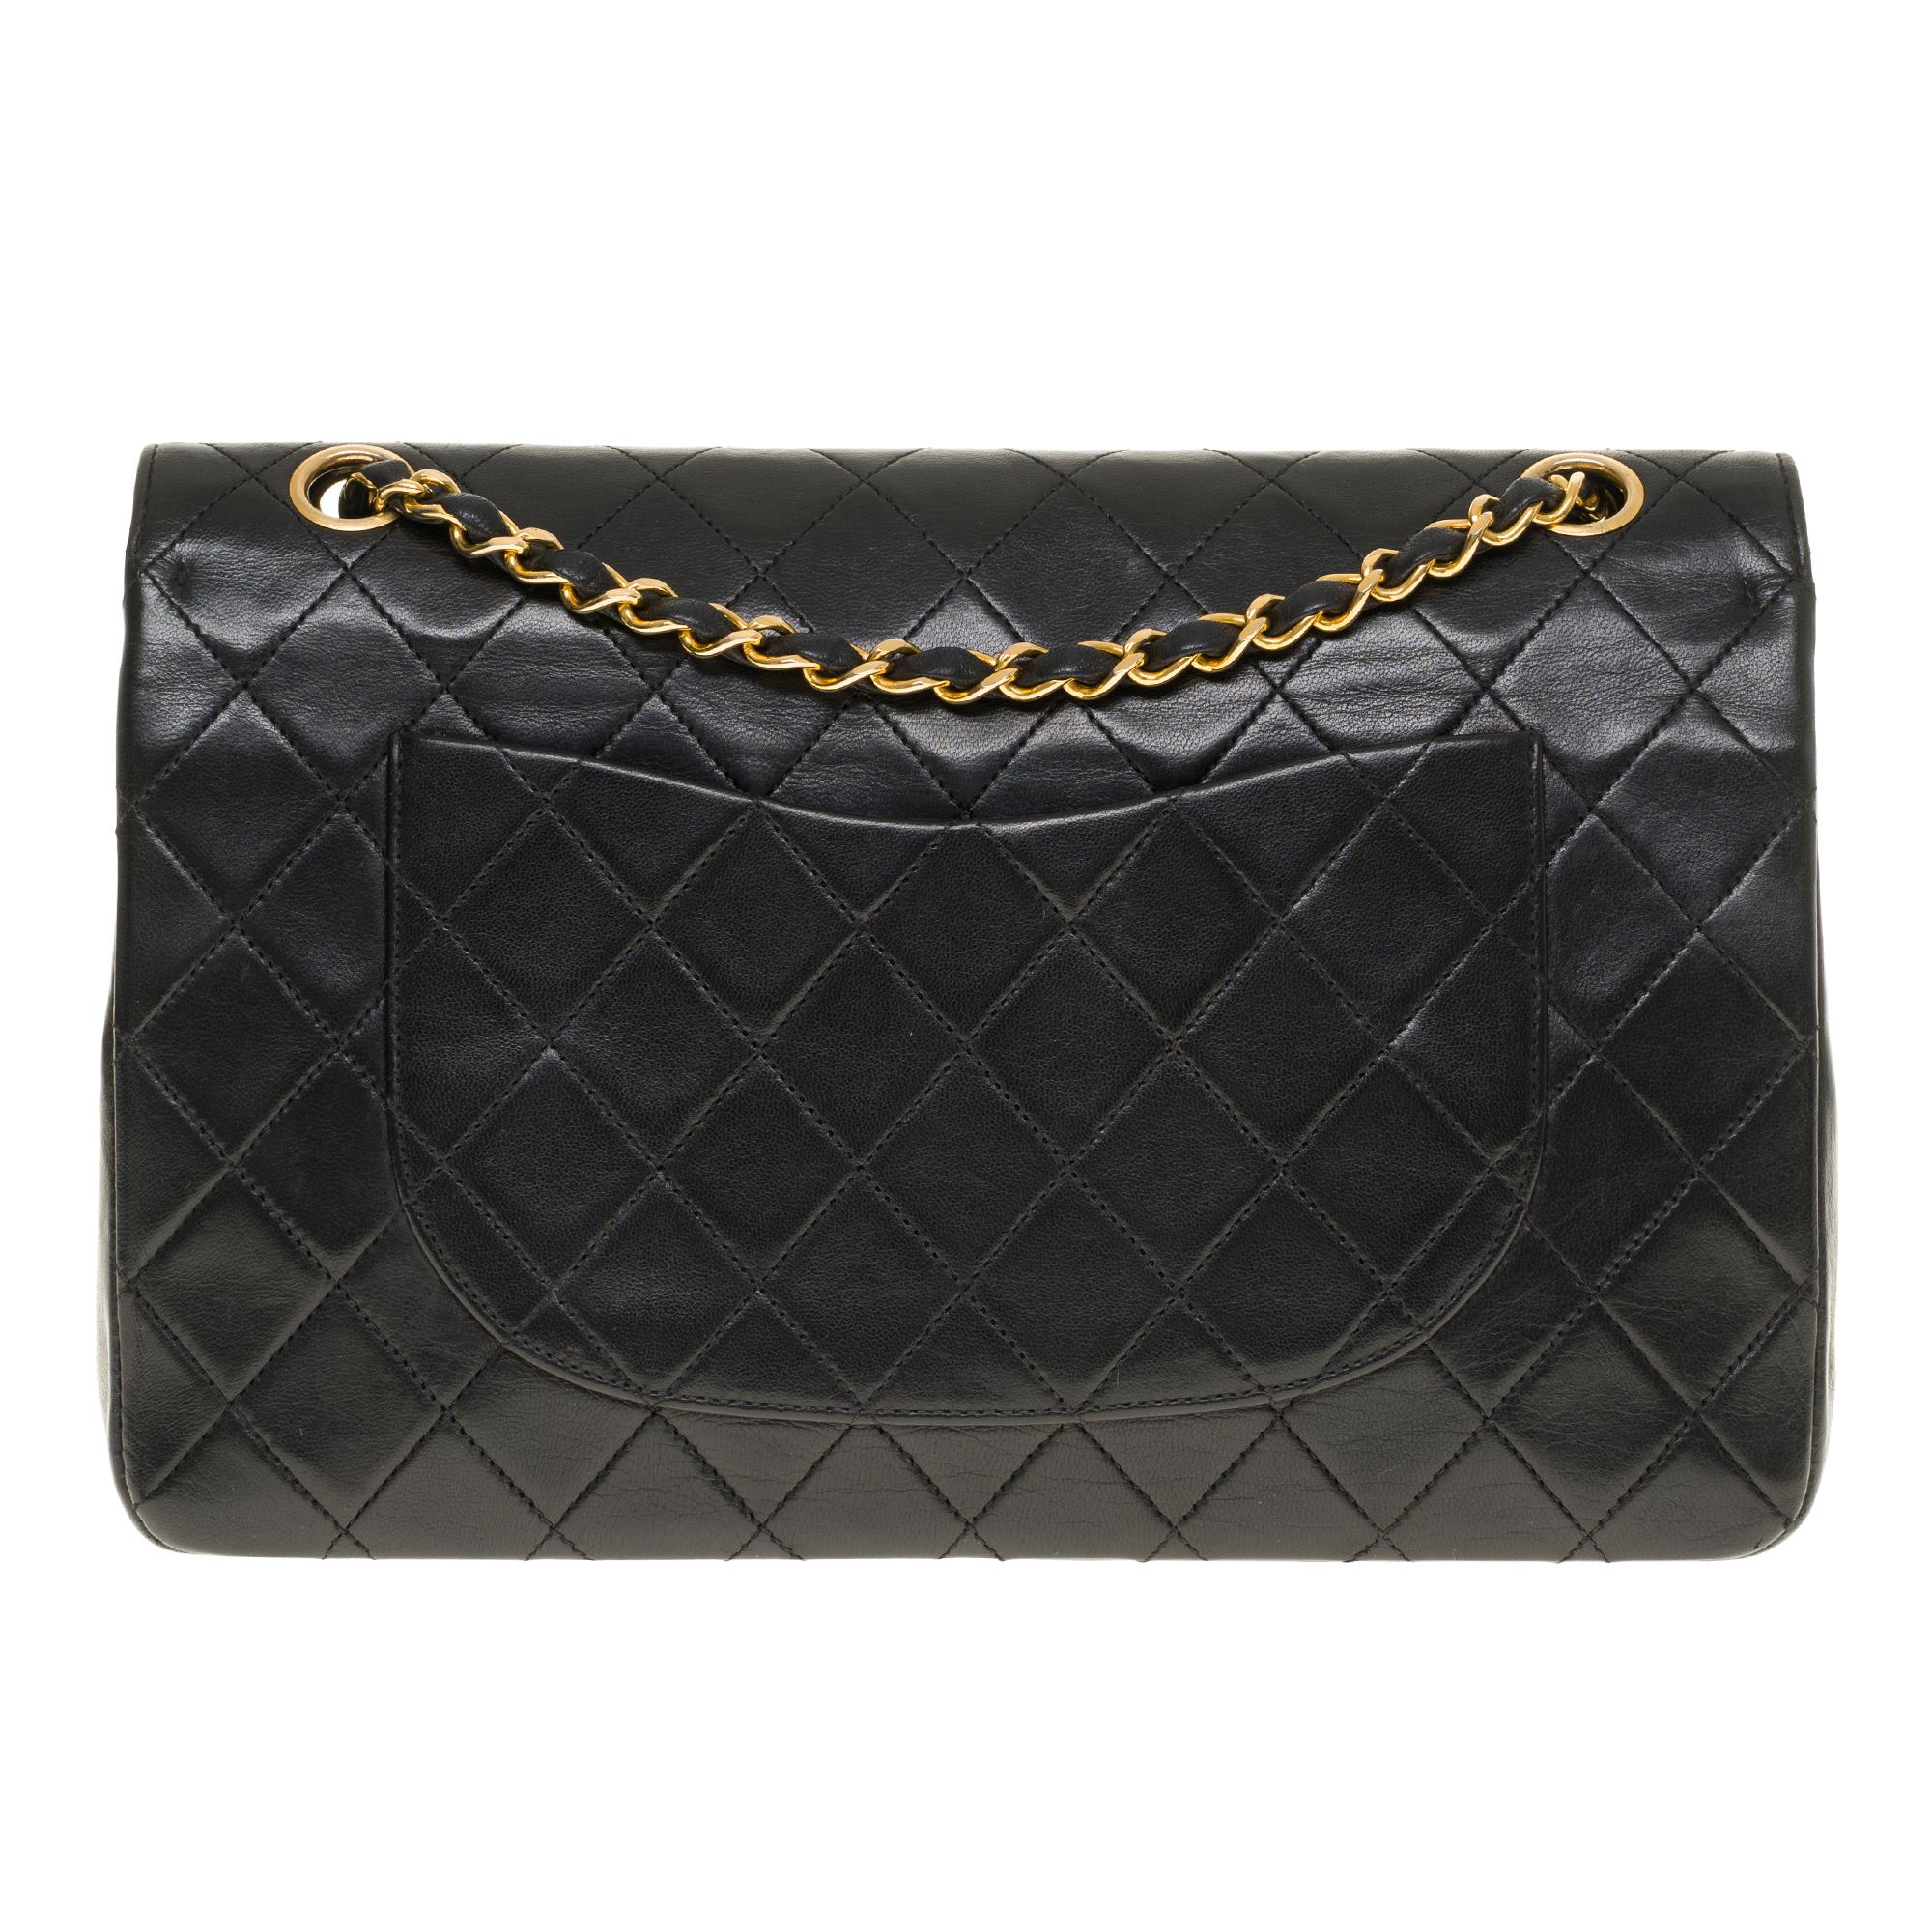 Beautiful Chanel Timeless/Classique 27cm handbag with double flap in black quilted lambskin leather, gold-tone metal hardware, a gold-tone metal chain handle interwoven with black leather allowing a hand or shoulder support.

Closure with gold metal